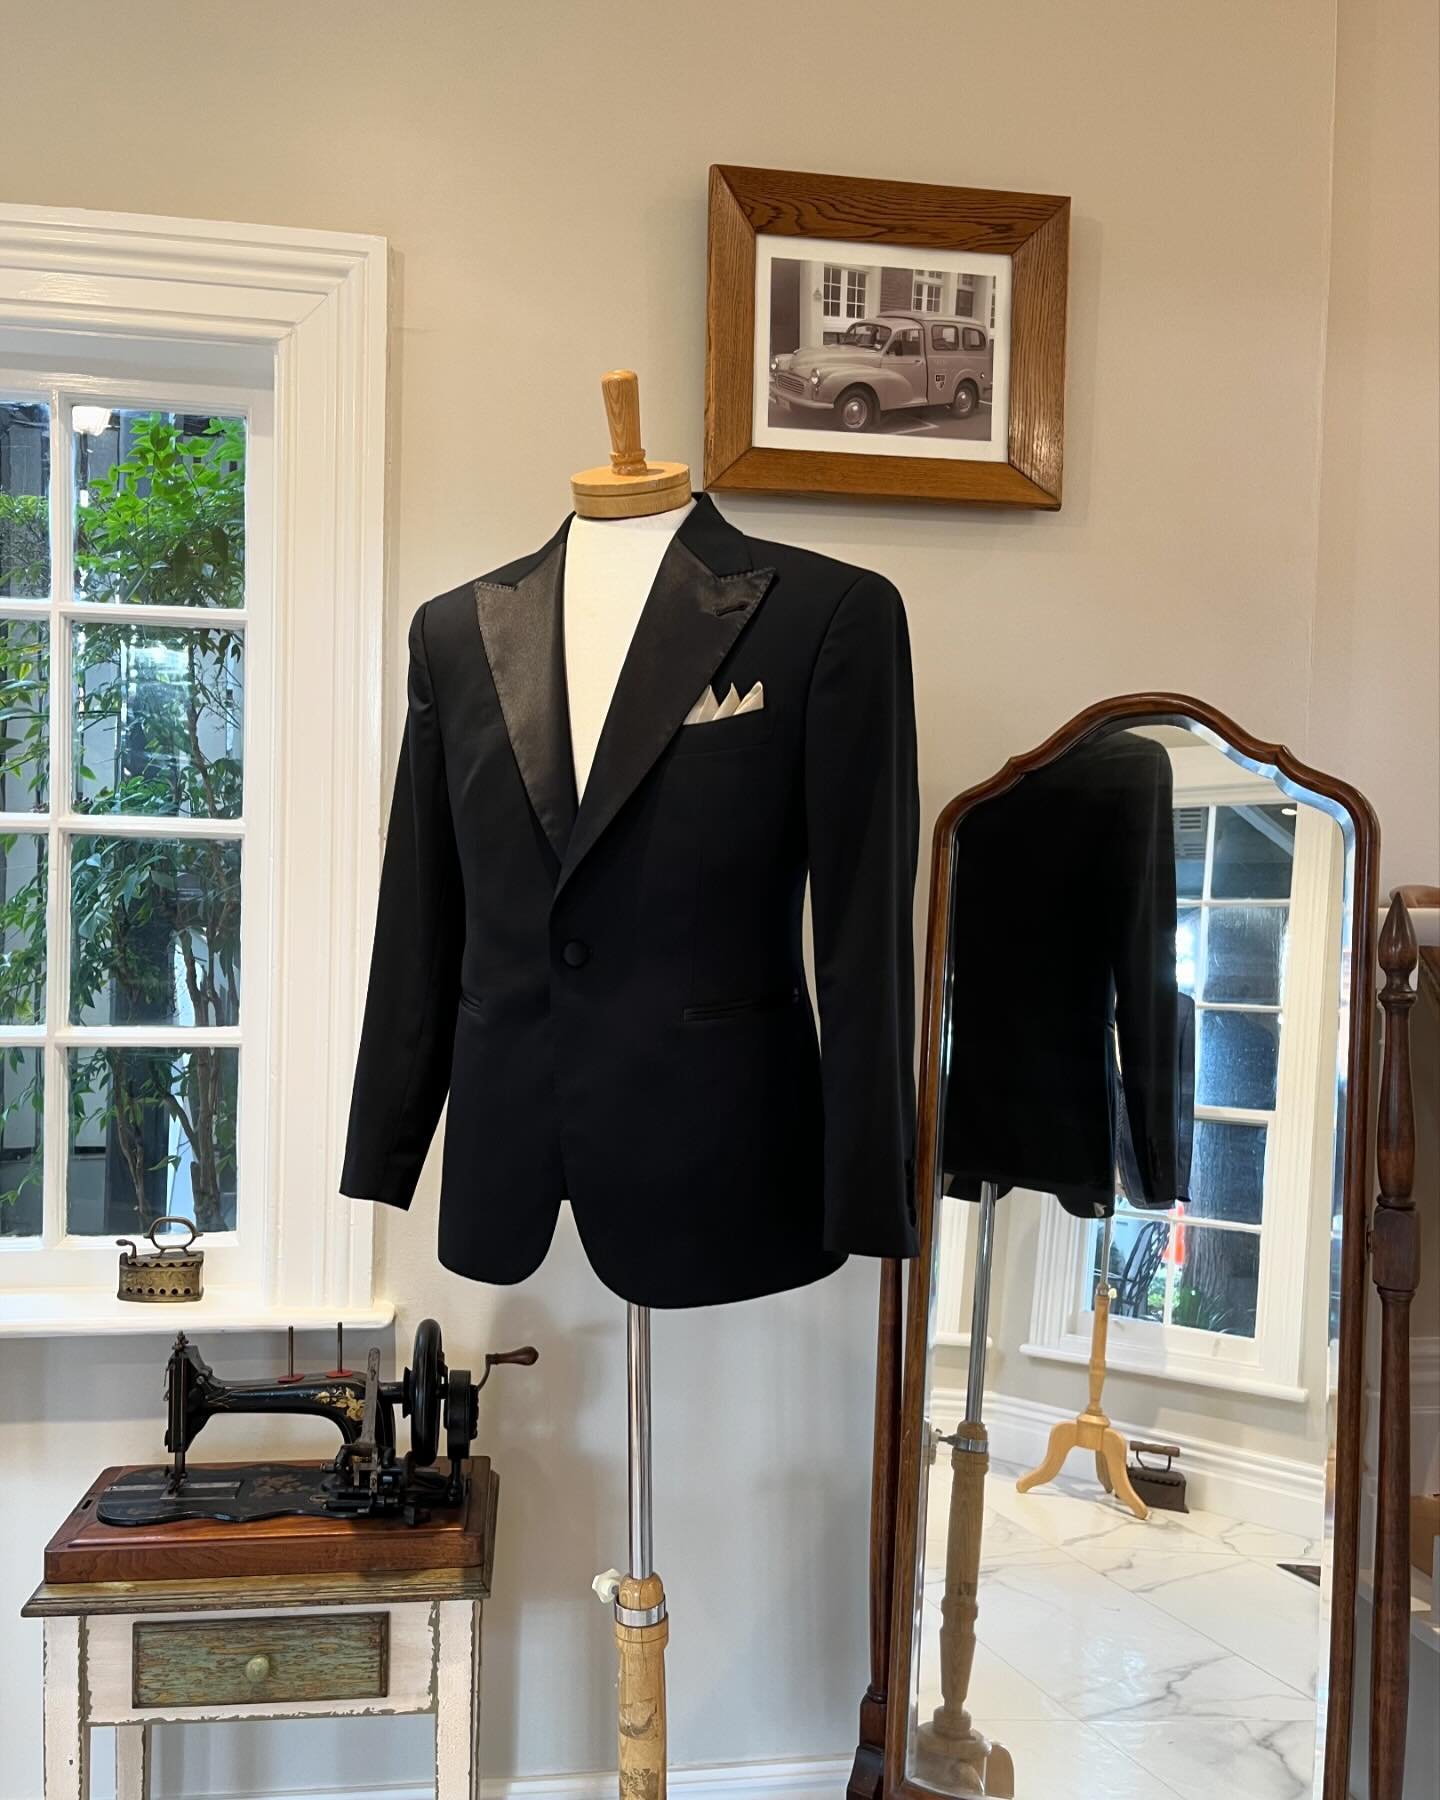 This is one foxy dinner suit. 

#bespoke #bespoketailor #nzmade #bespoketailoring #tailoring #workshop #fashion #menswear #dinnersuit #mensfashion #suit